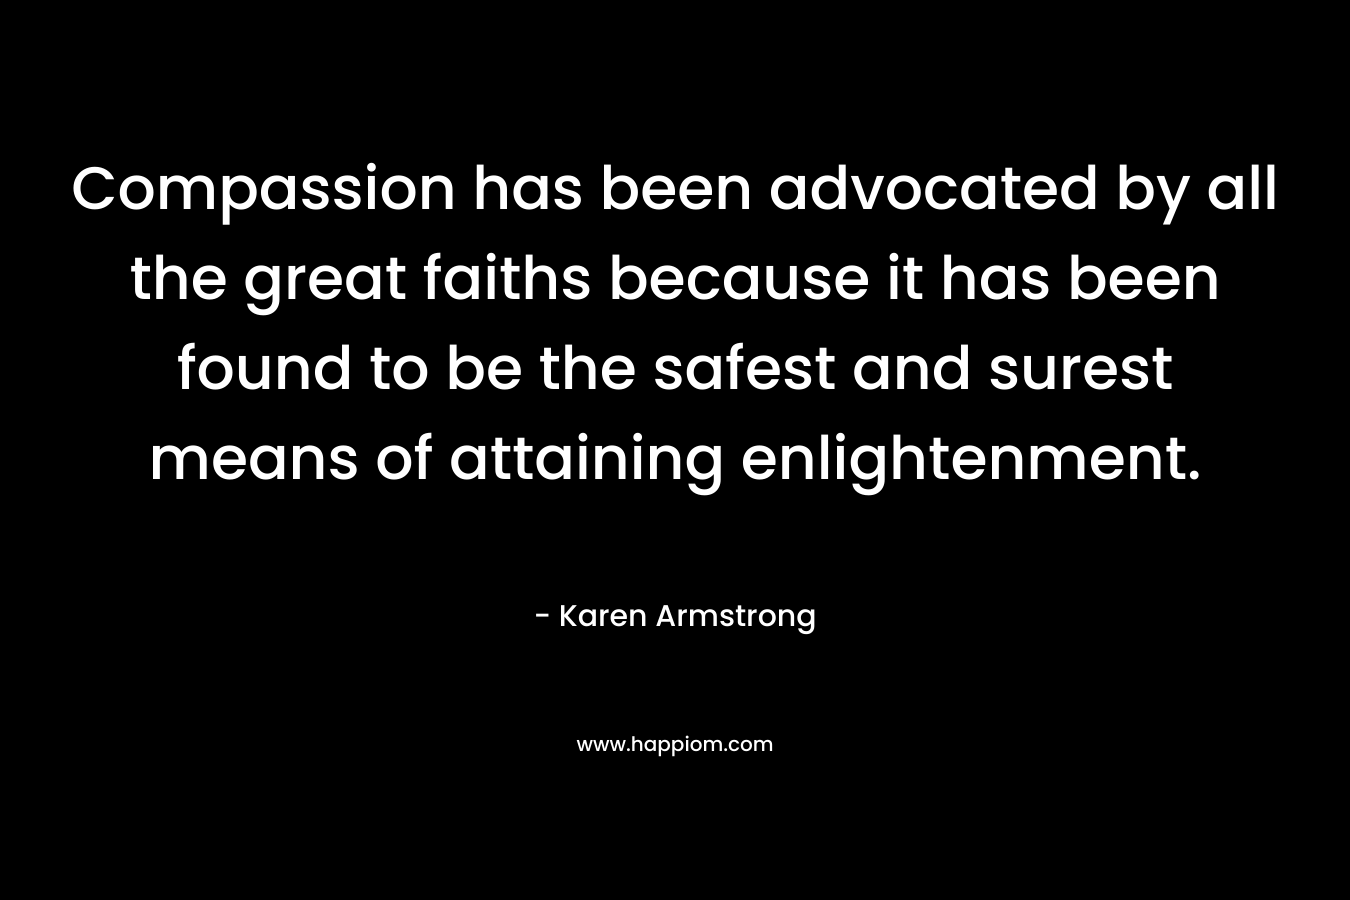 Compassion has been advocated by all the great faiths because it has been found to be the safest and surest means of attaining enlightenment.